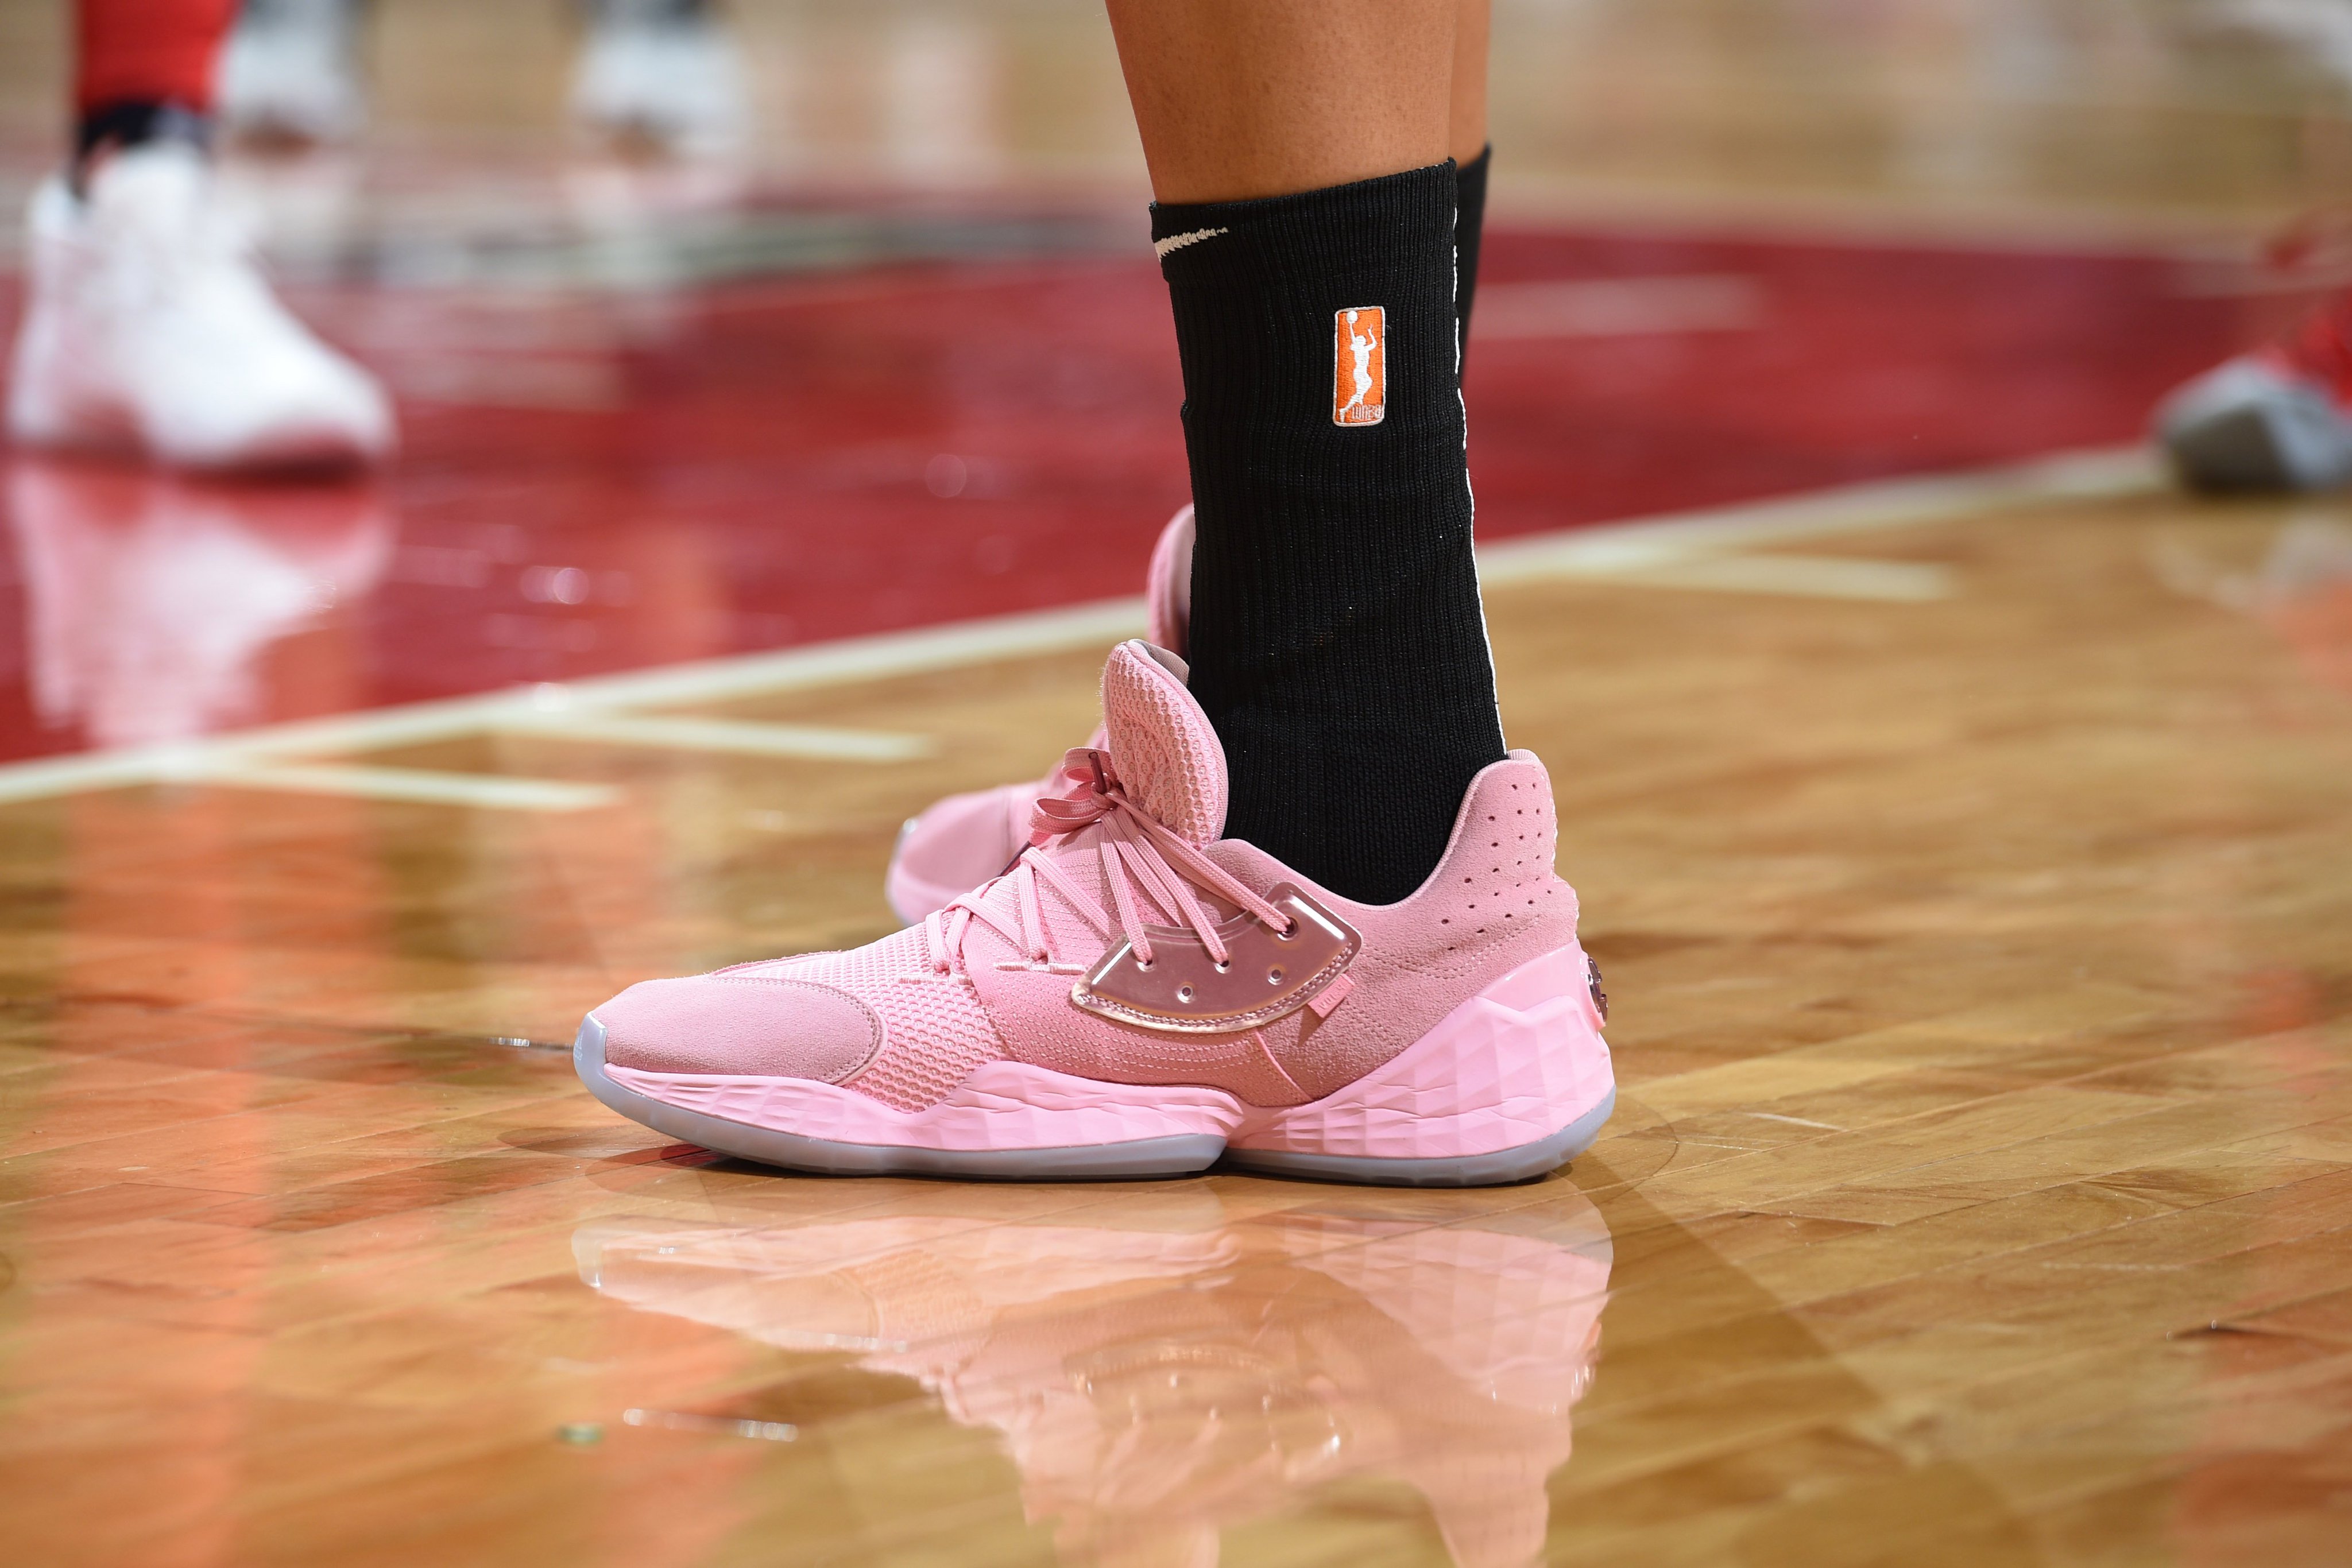 notificación amistad ligado B/R Kicks on Twitter: ".@ecambage with the Adidas Harden Vol. 4 in “Pink  Lemonade” colorway. These drop October 26. https://t.co/F4qo9BAheS" /  Twitter